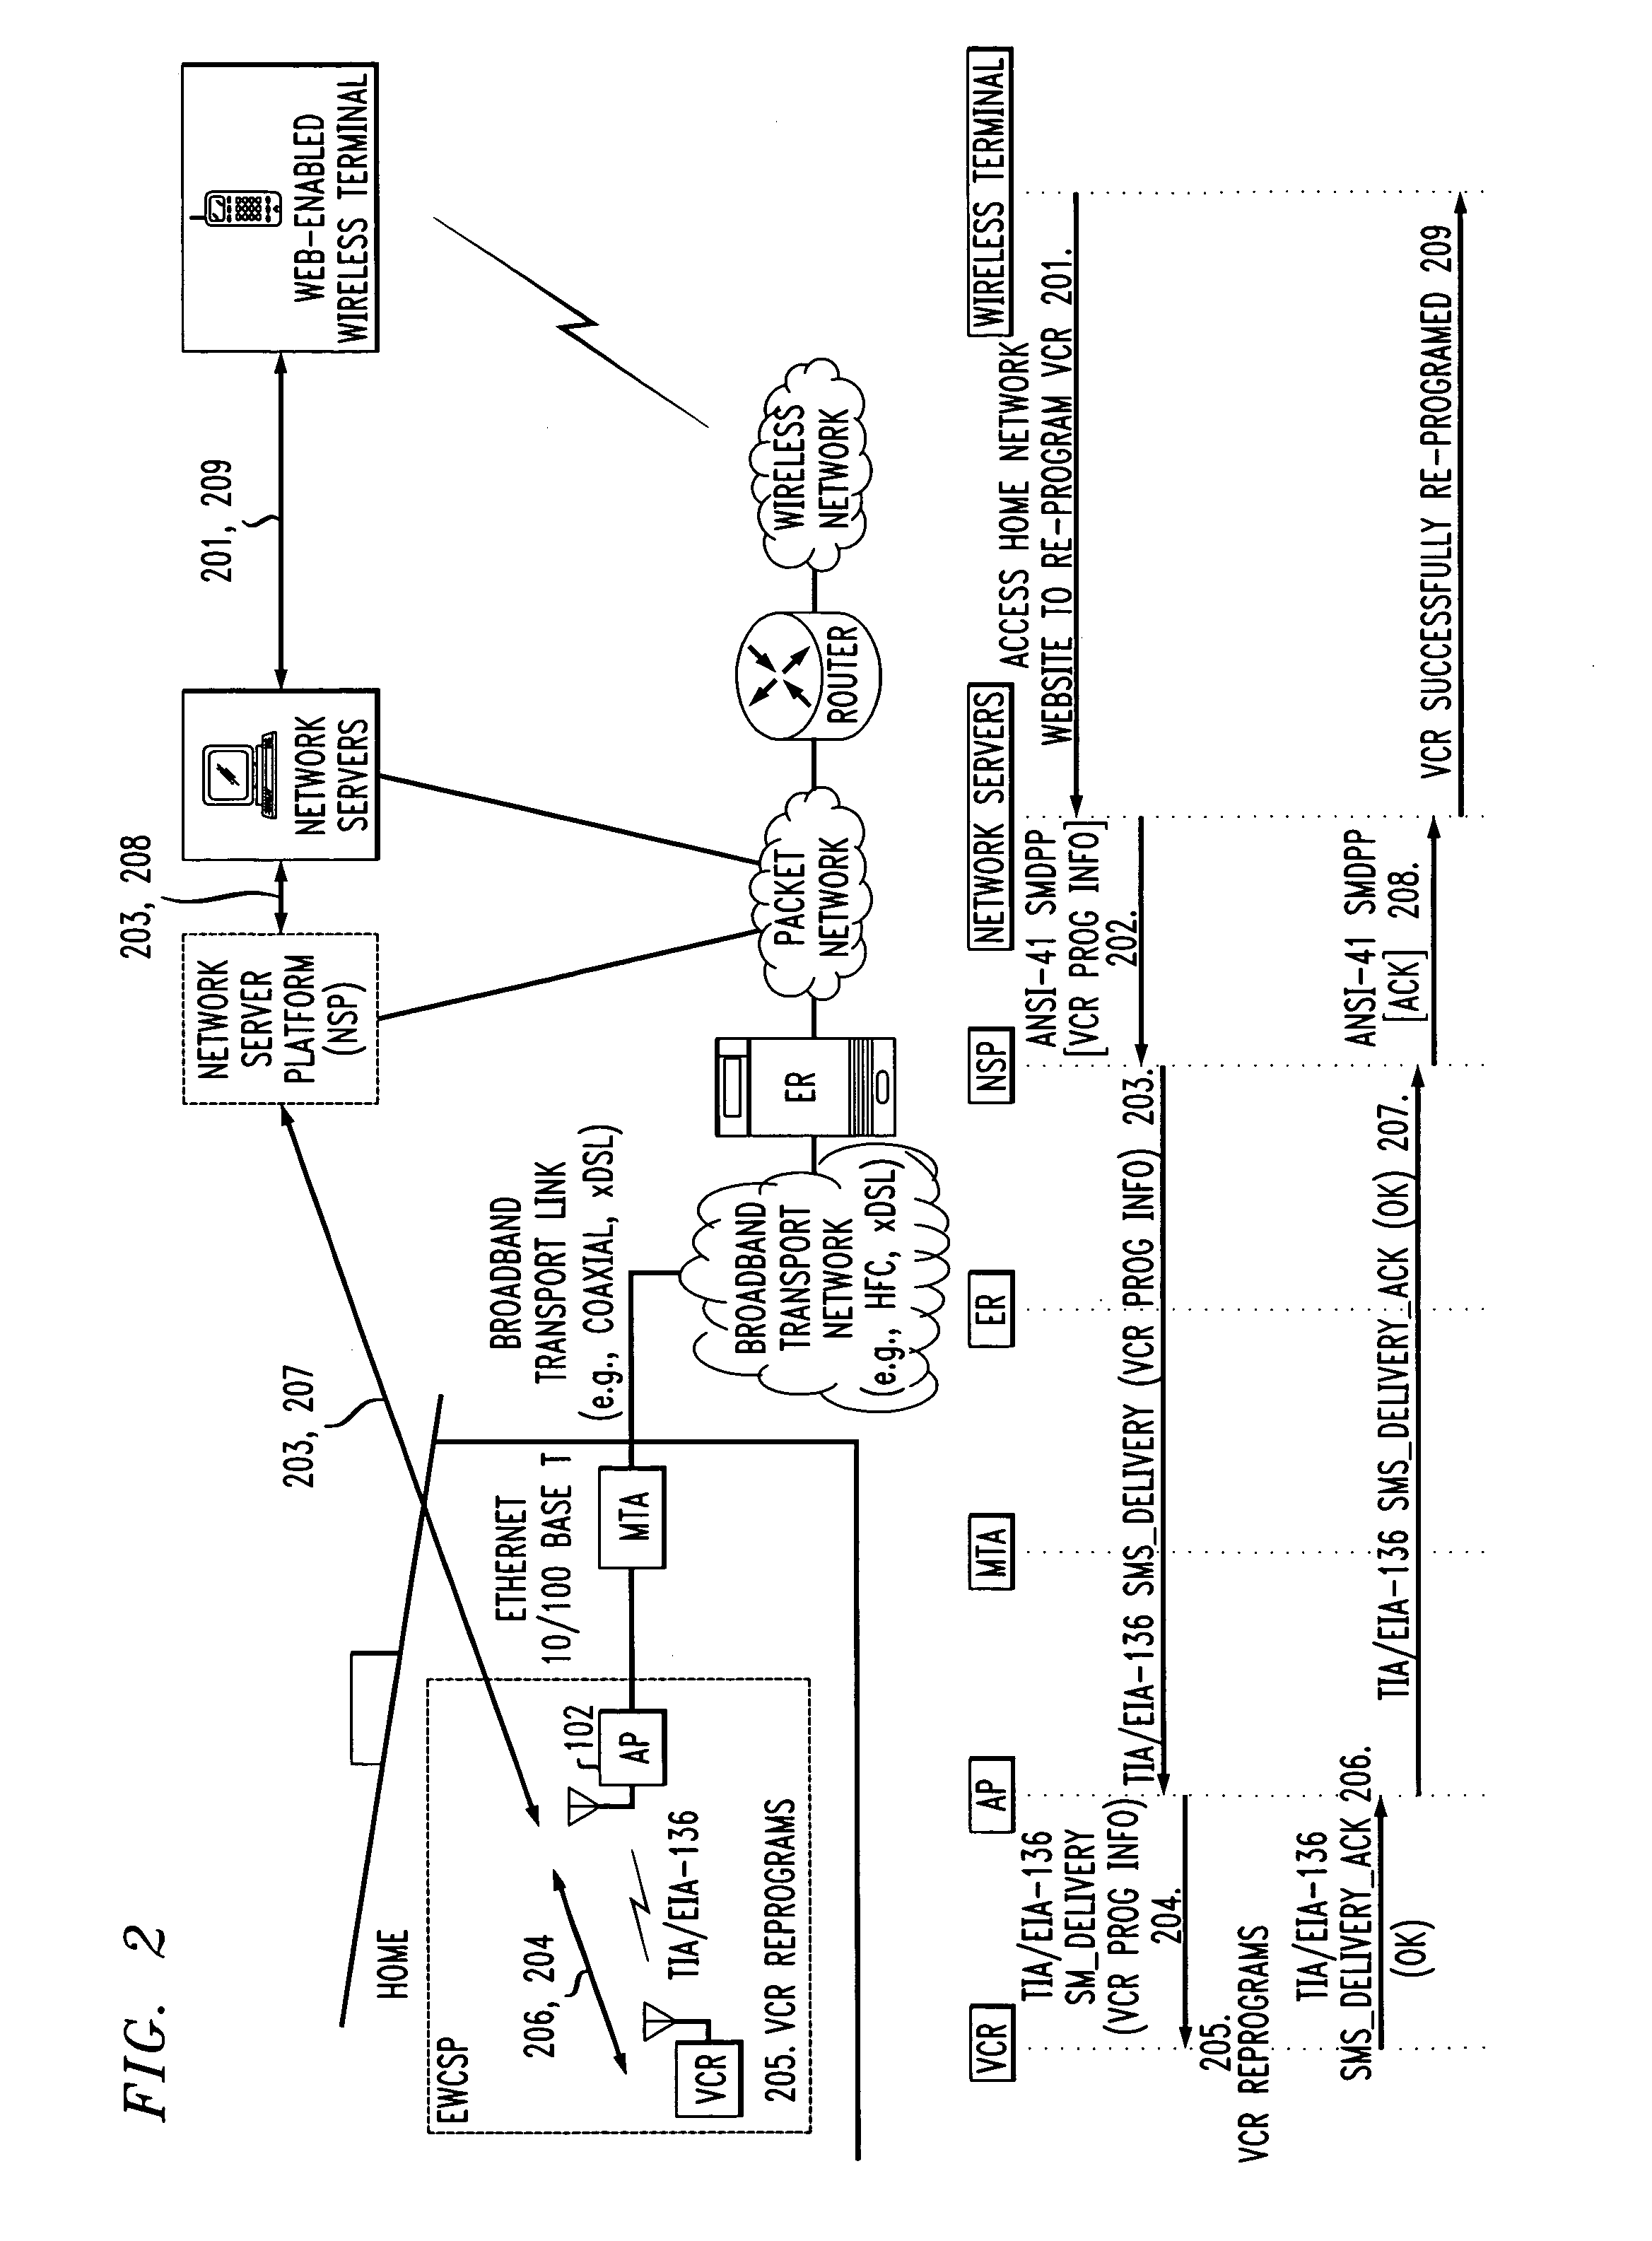 Broadband network with enterprise wireless communication method for residential and business environment